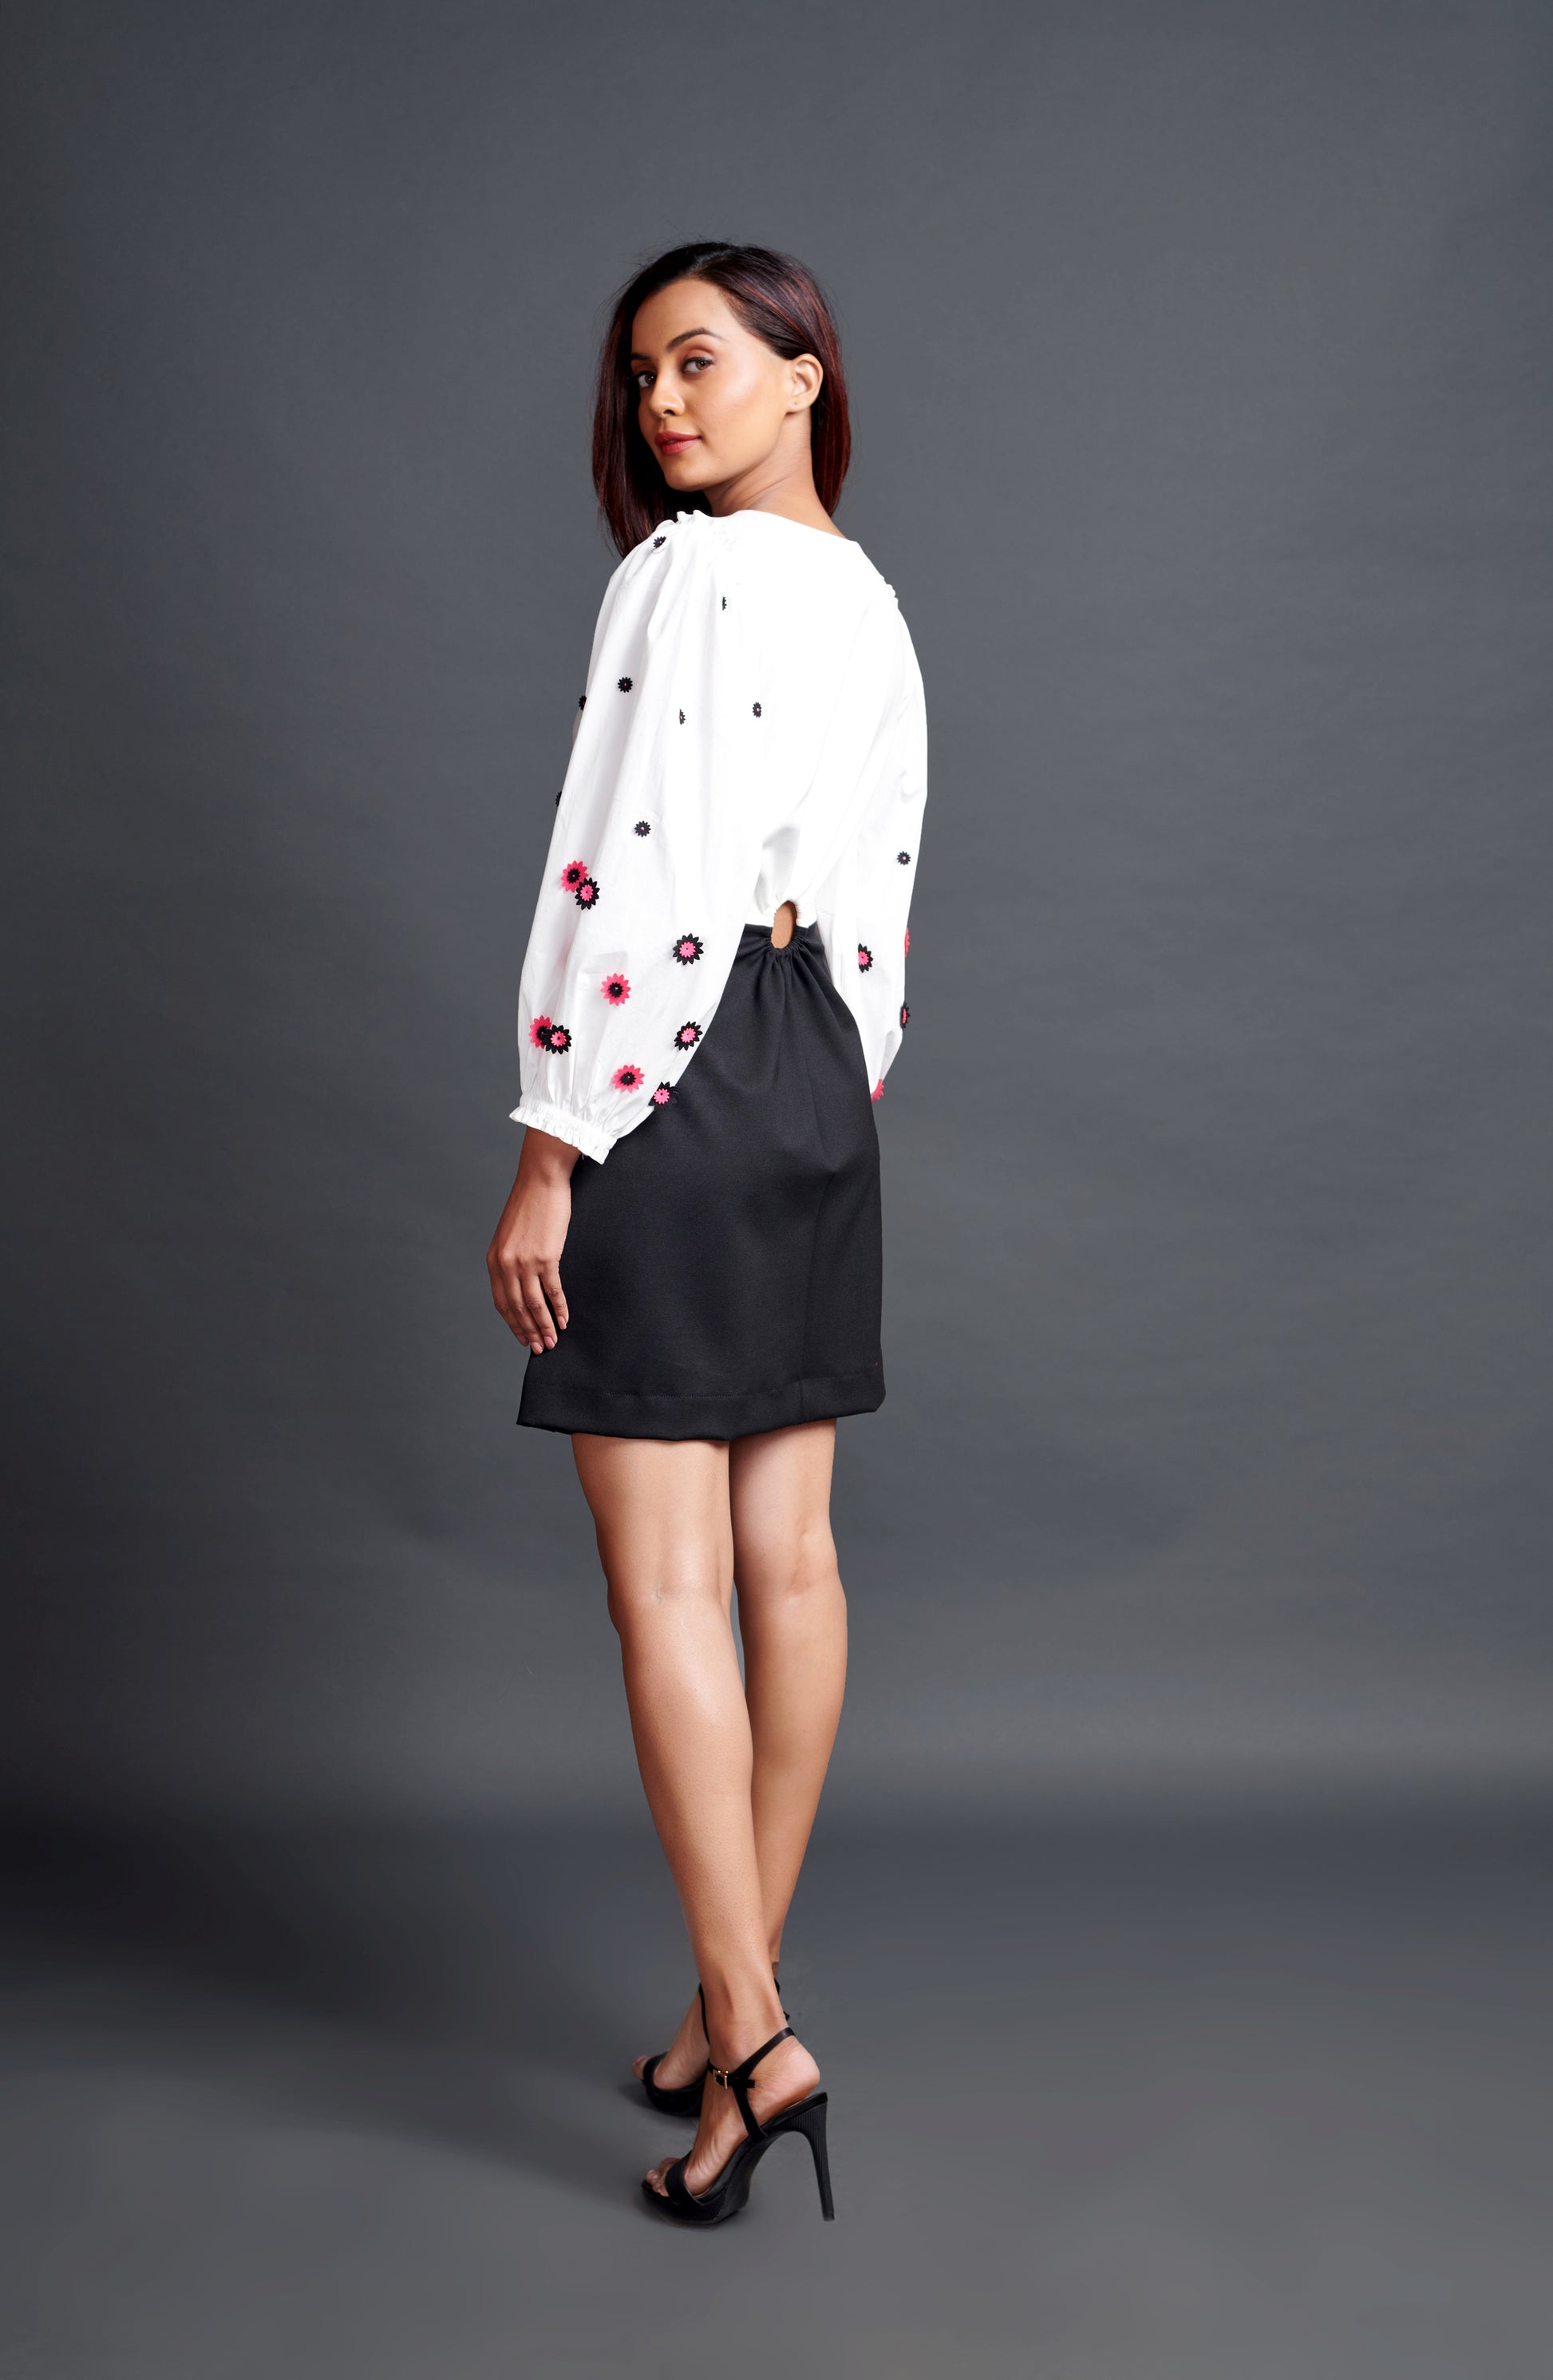 Image of WHITE SIDE CUTOUT DRESS WITH CUTWORK EMBROIDERED SLEEVES. From savoirfashions.com